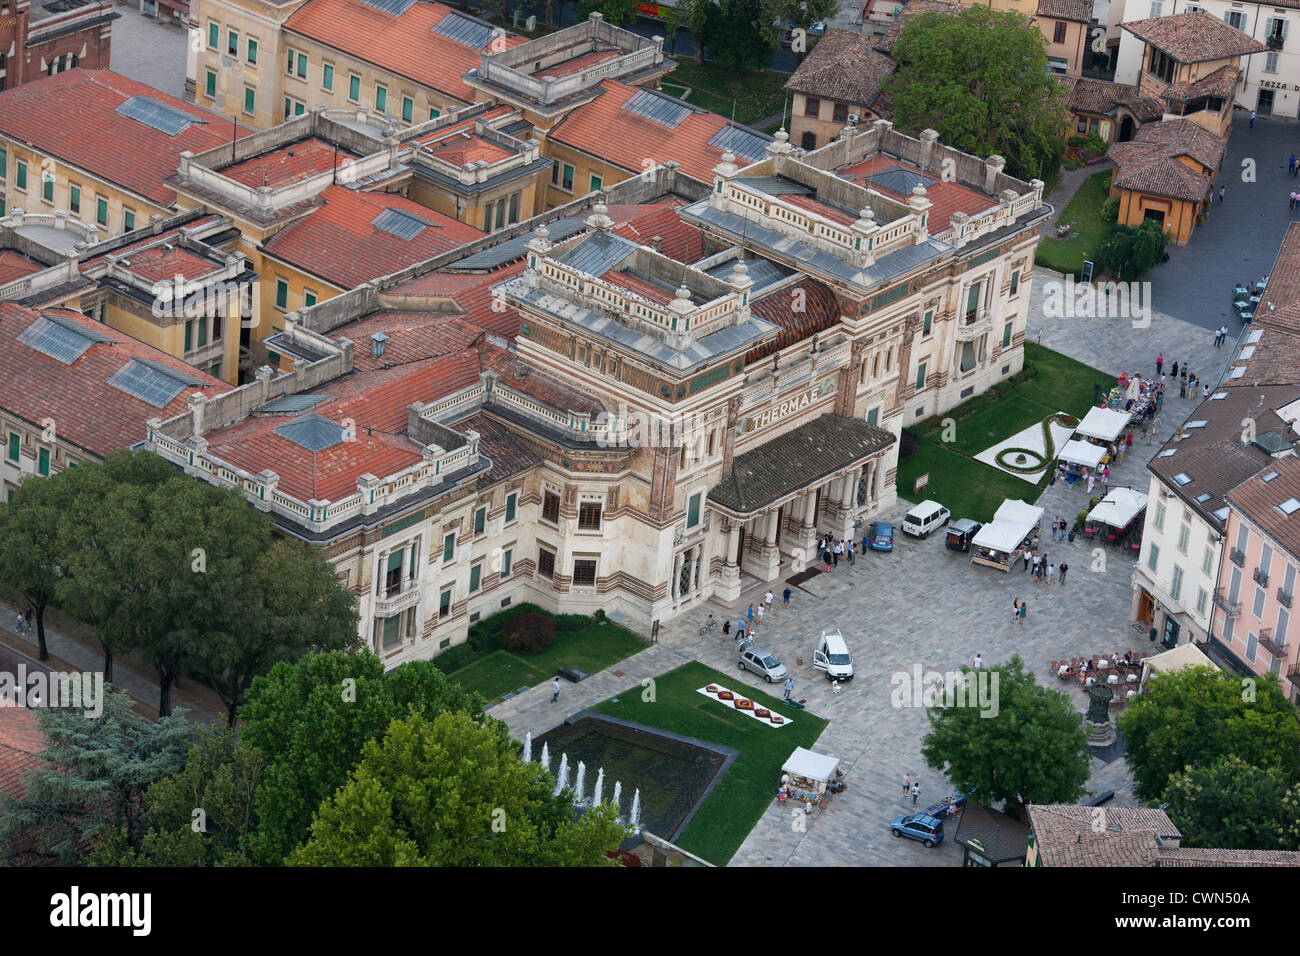 AERIAL VIEW. Berzieri Thermal Baths. Salsomaggiore terme, Province of Parma, Emilia-Romagna, Italy. Stock Photo